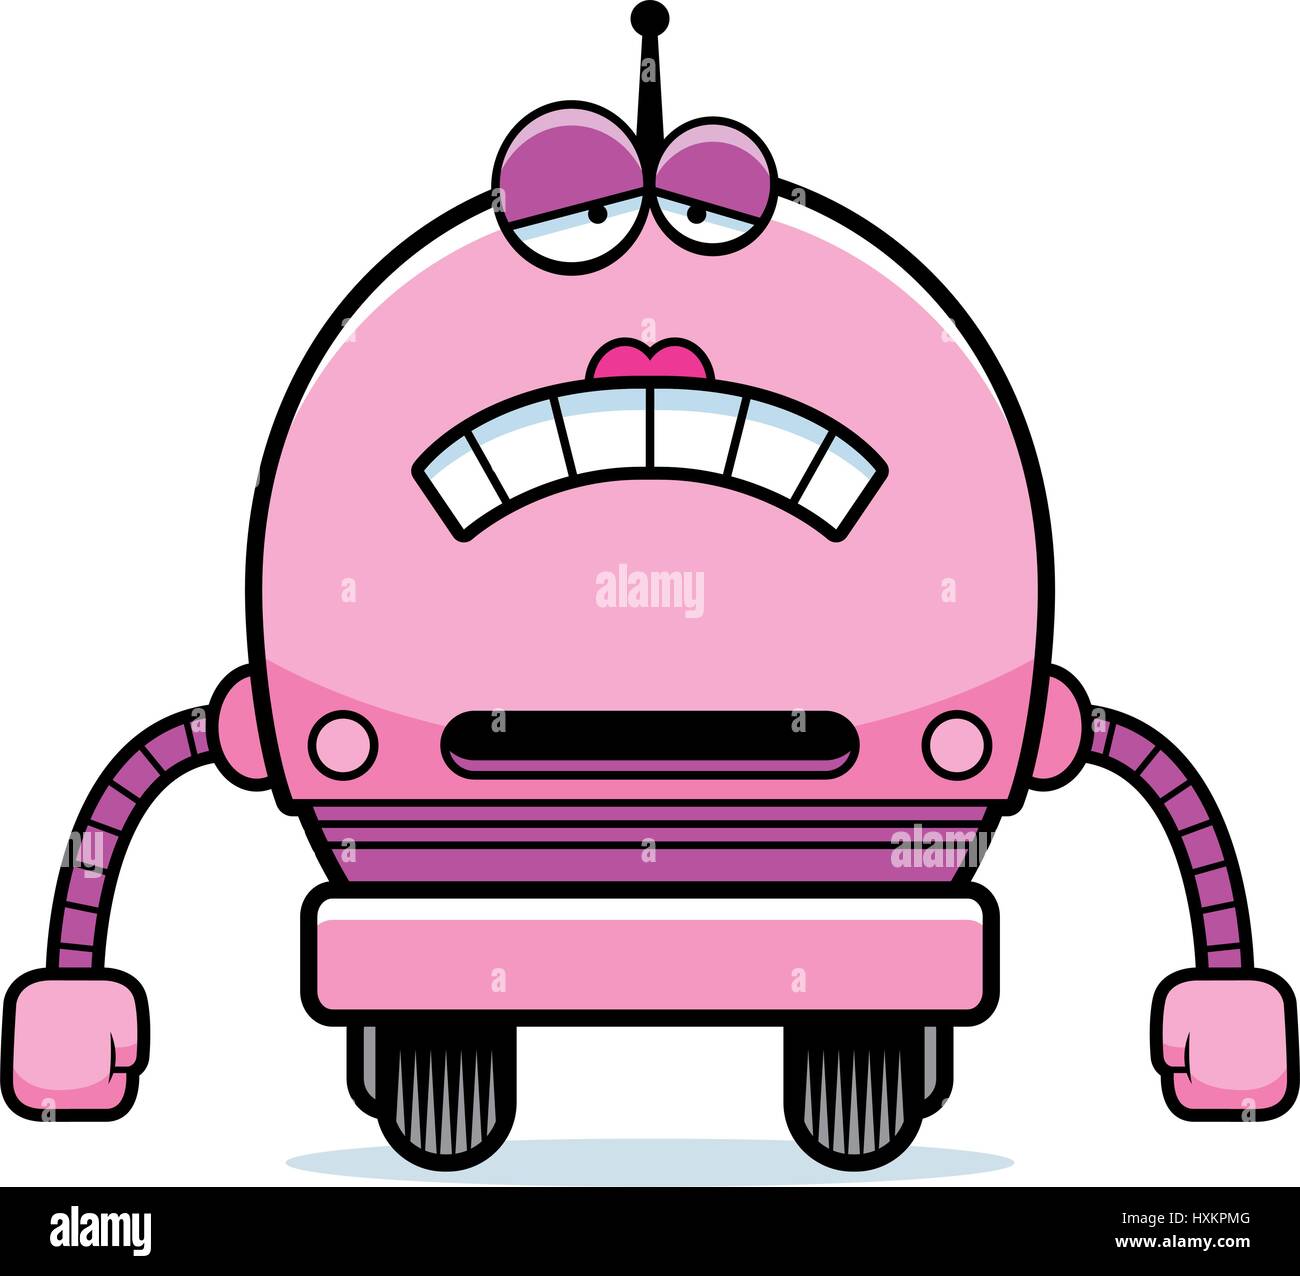 A cartoon illustration of a female pink robot looking sad. Stock Vector